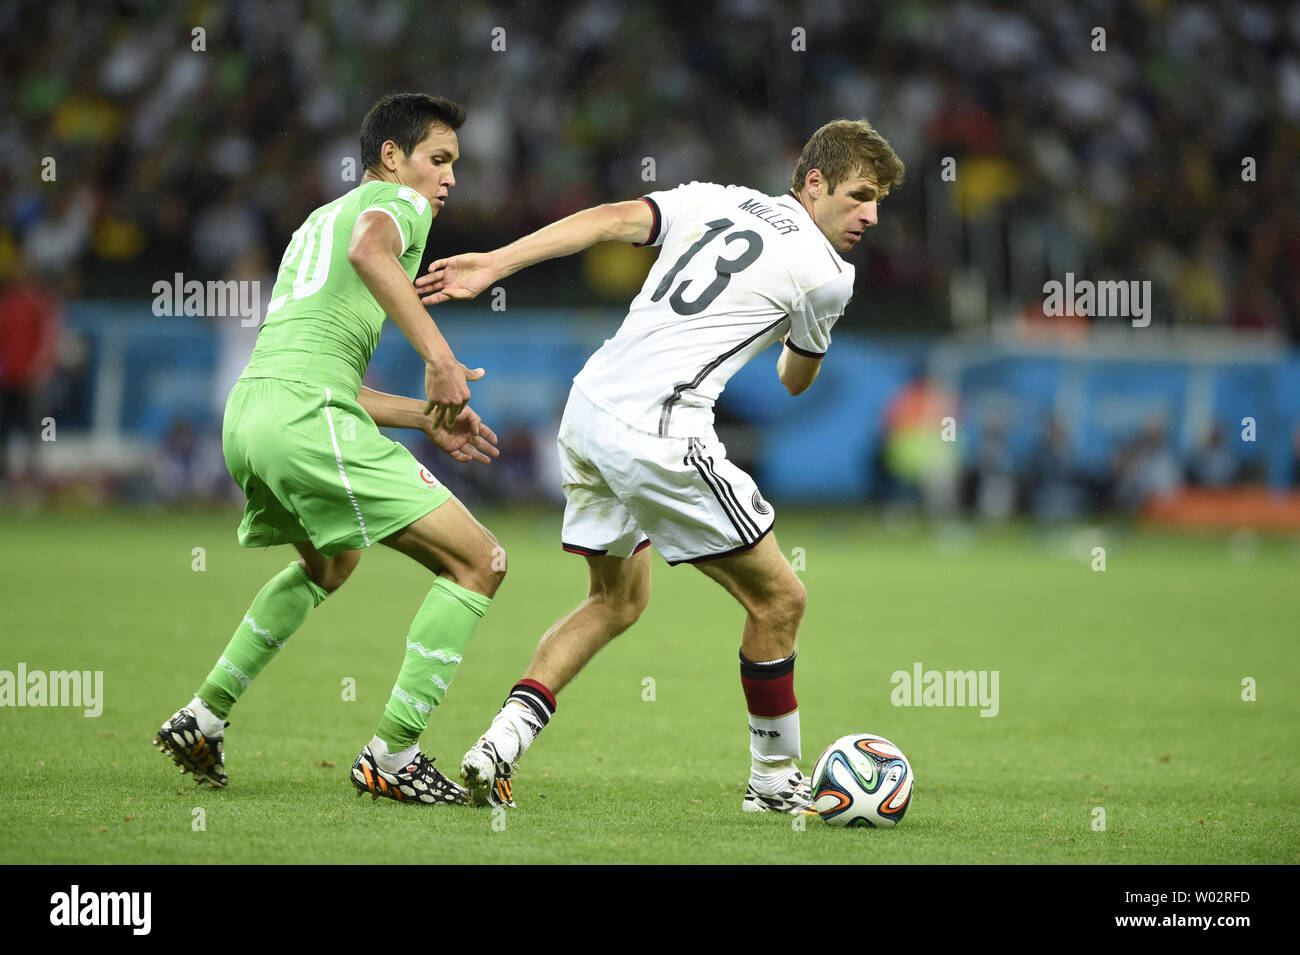 Thomas Muller of Germany competes with Aissa Mandi (L) of Algeria during the 2014 FIFA World Cup Round of 16 match at the Estadio Beira-Rio in Porto Alegre, Brazil on June 30, 2014. UPI/Chris Brunskill Stock Photo